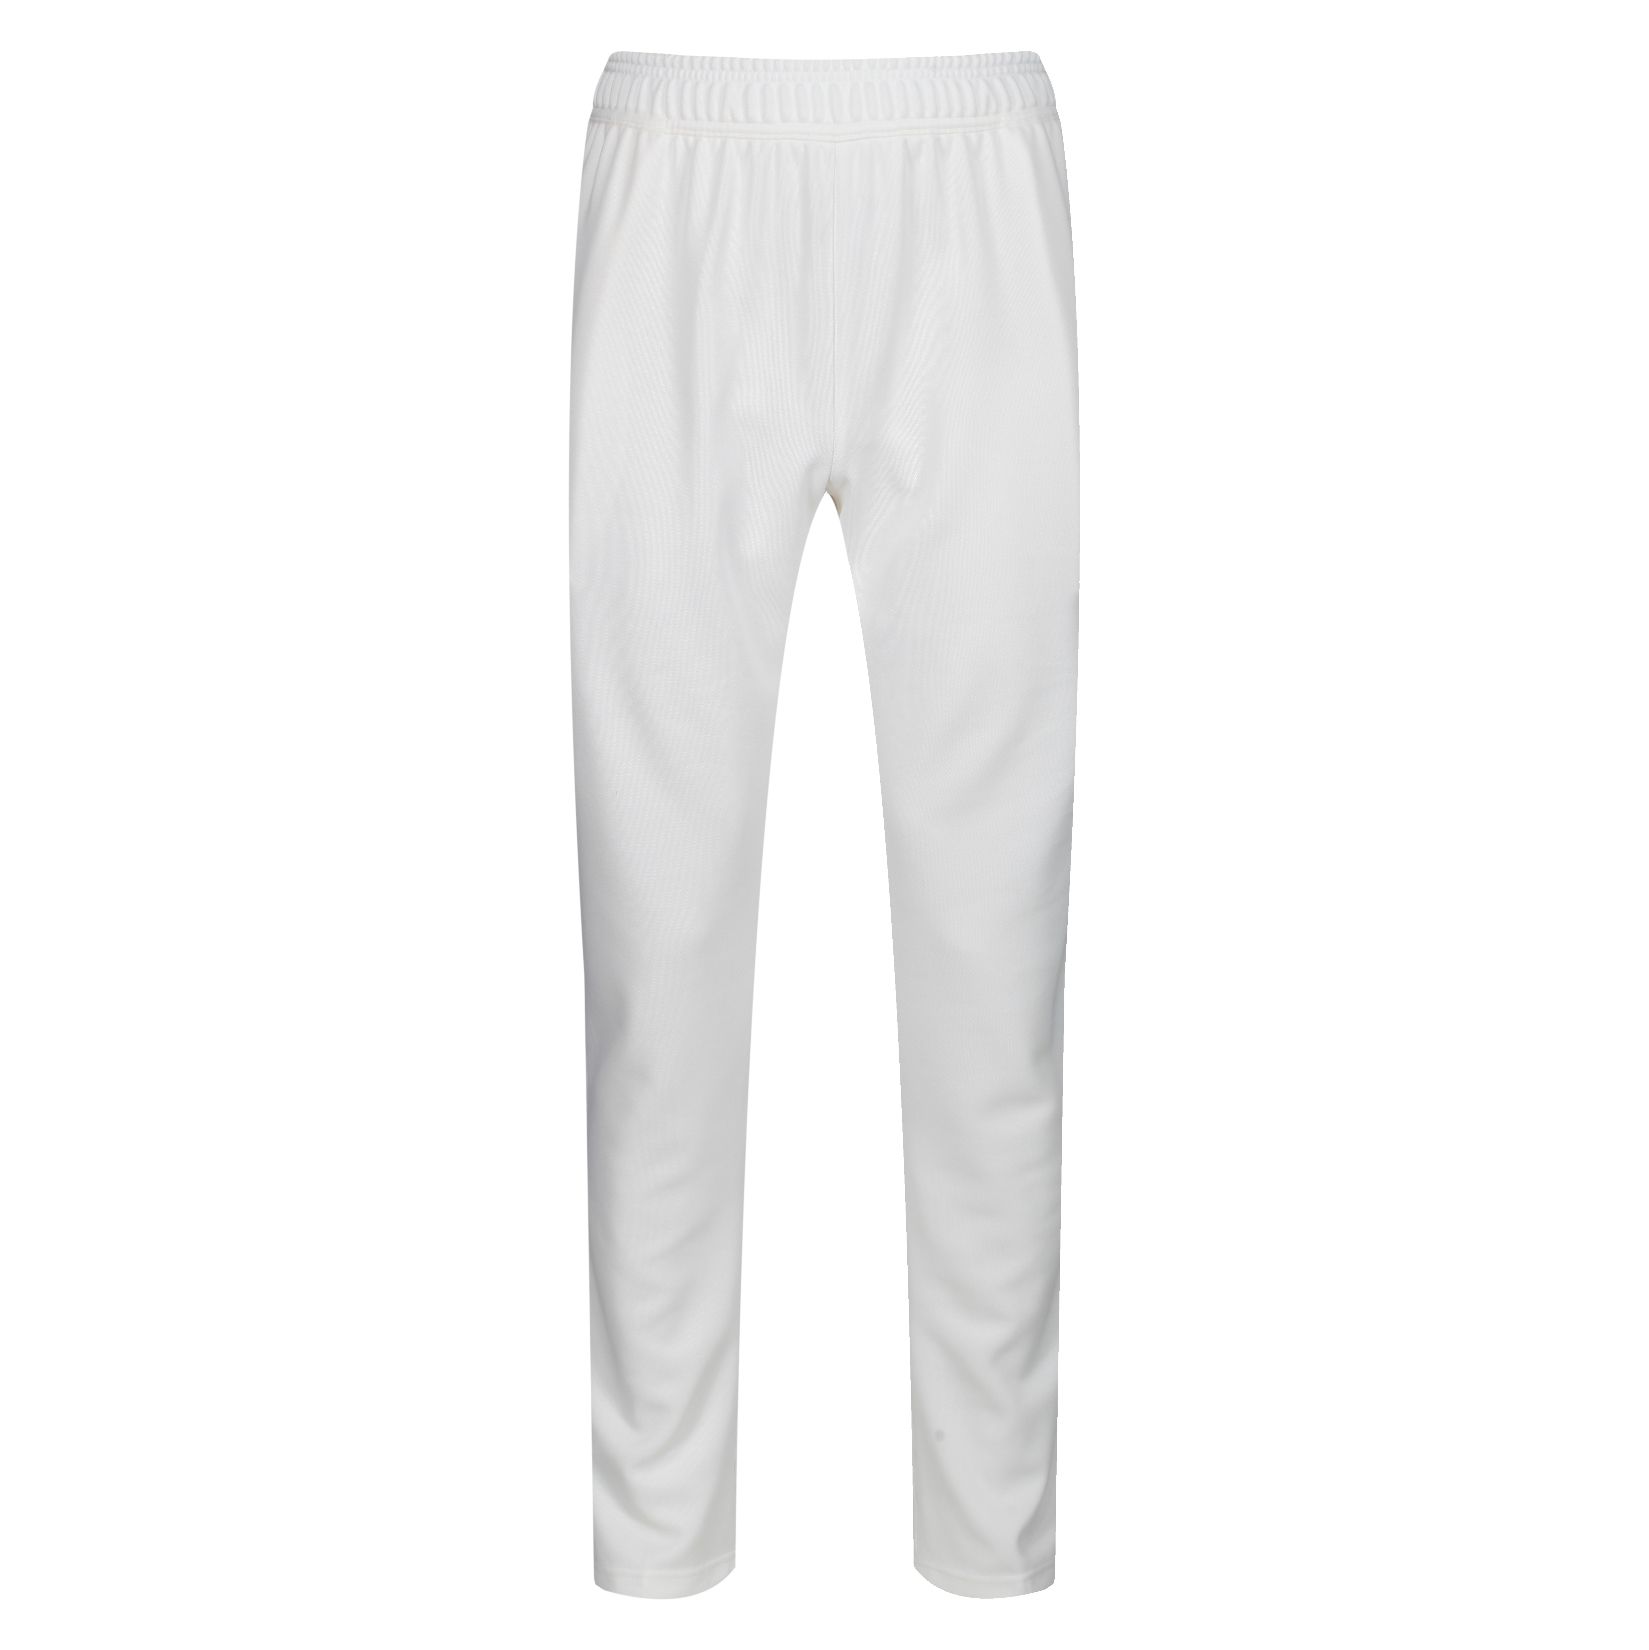 Classic Cricket Trousers